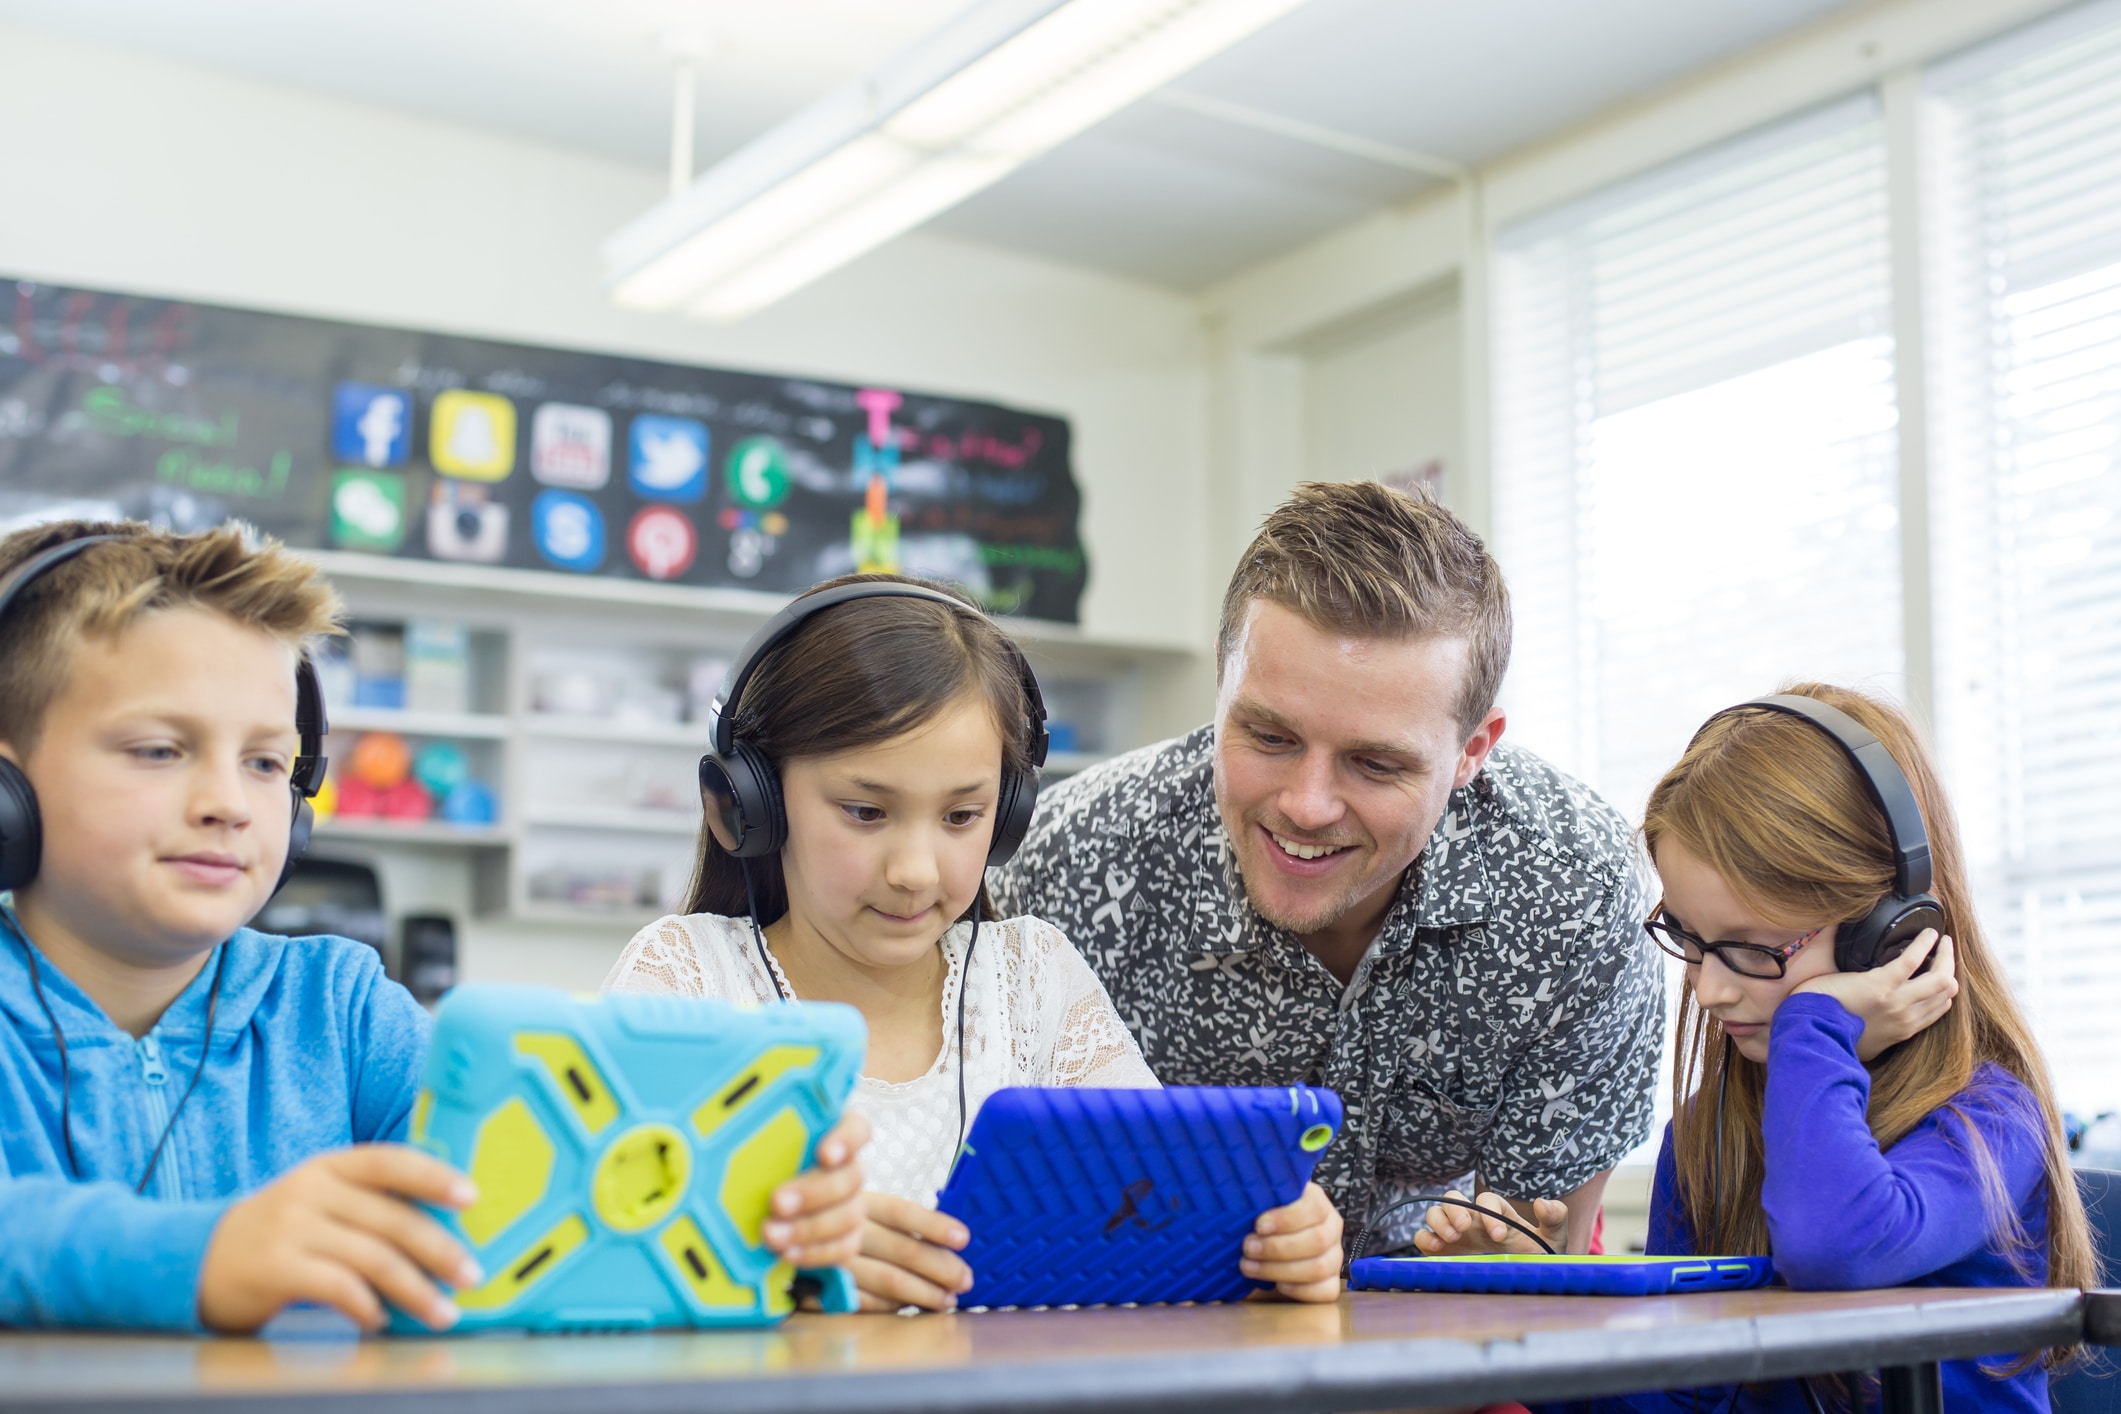 Learn more about the benefits of utilizing digital EdTech tools such as ClassFlow.